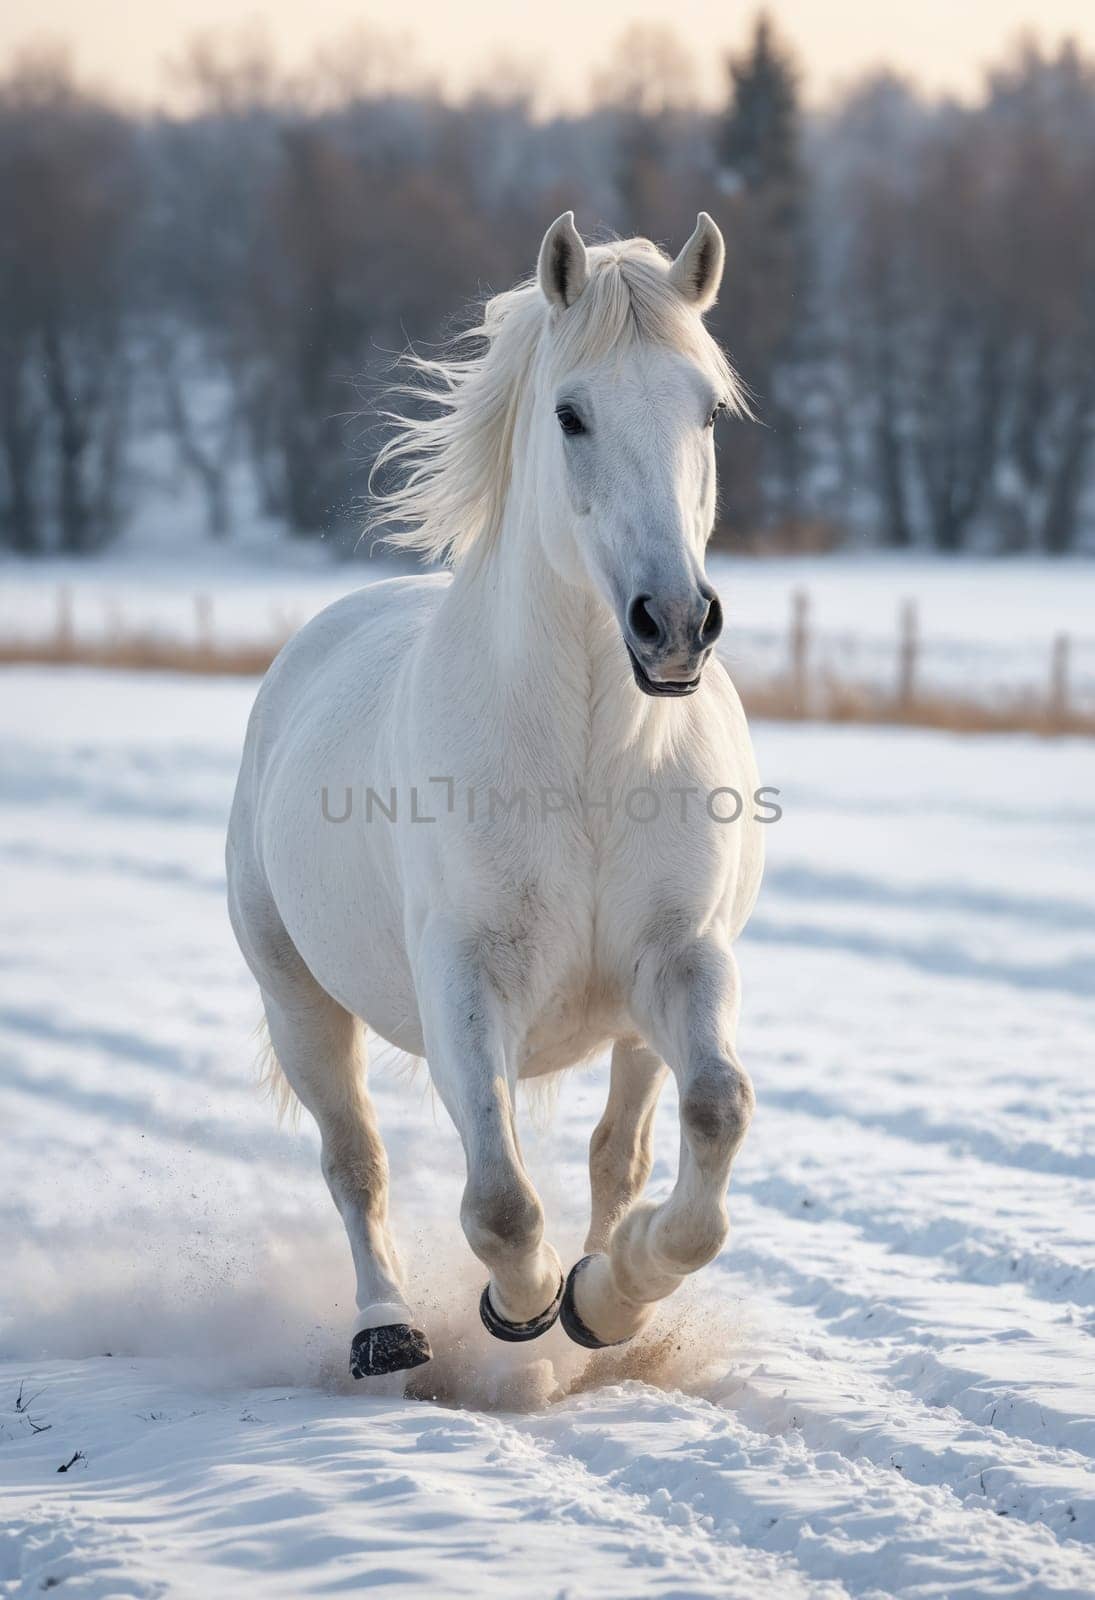 Snowy Stroll: White Horse Sauntering in a Wintry Wonderland by Andre1ns